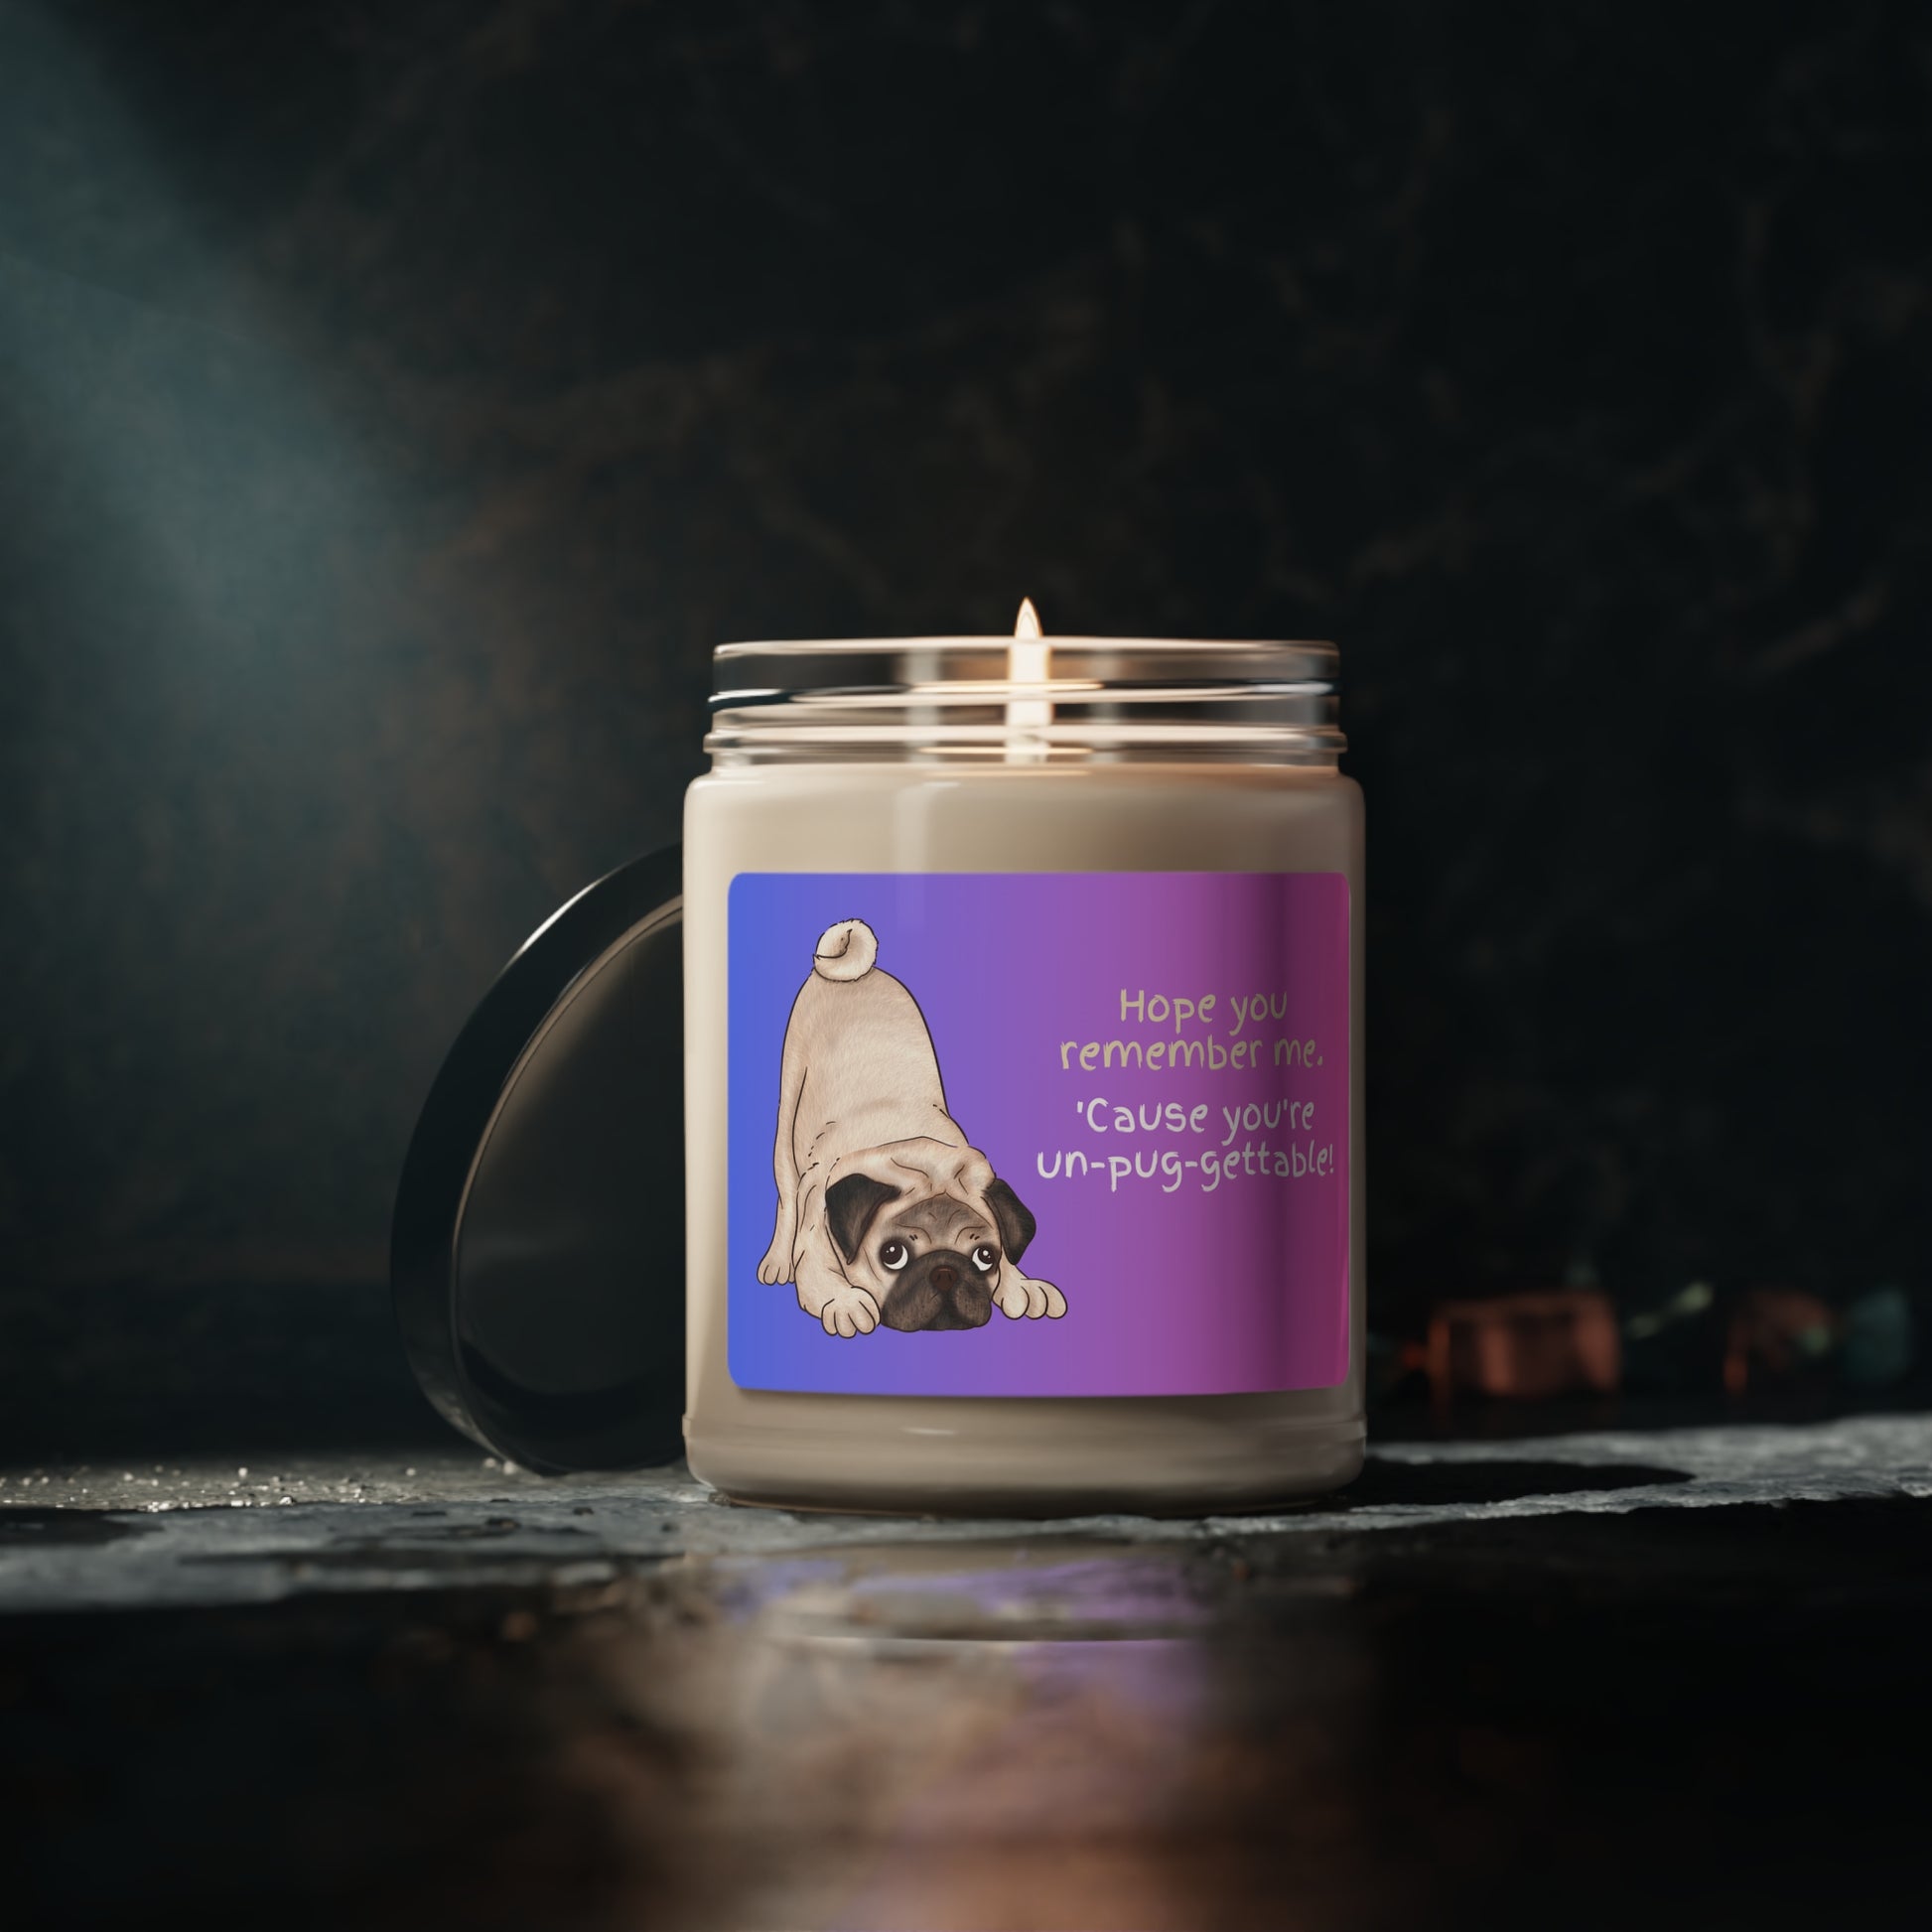 You're Unforgettable - Pug Themed - Dog - Scented Soy Candle, 9oz - Meditation Candle